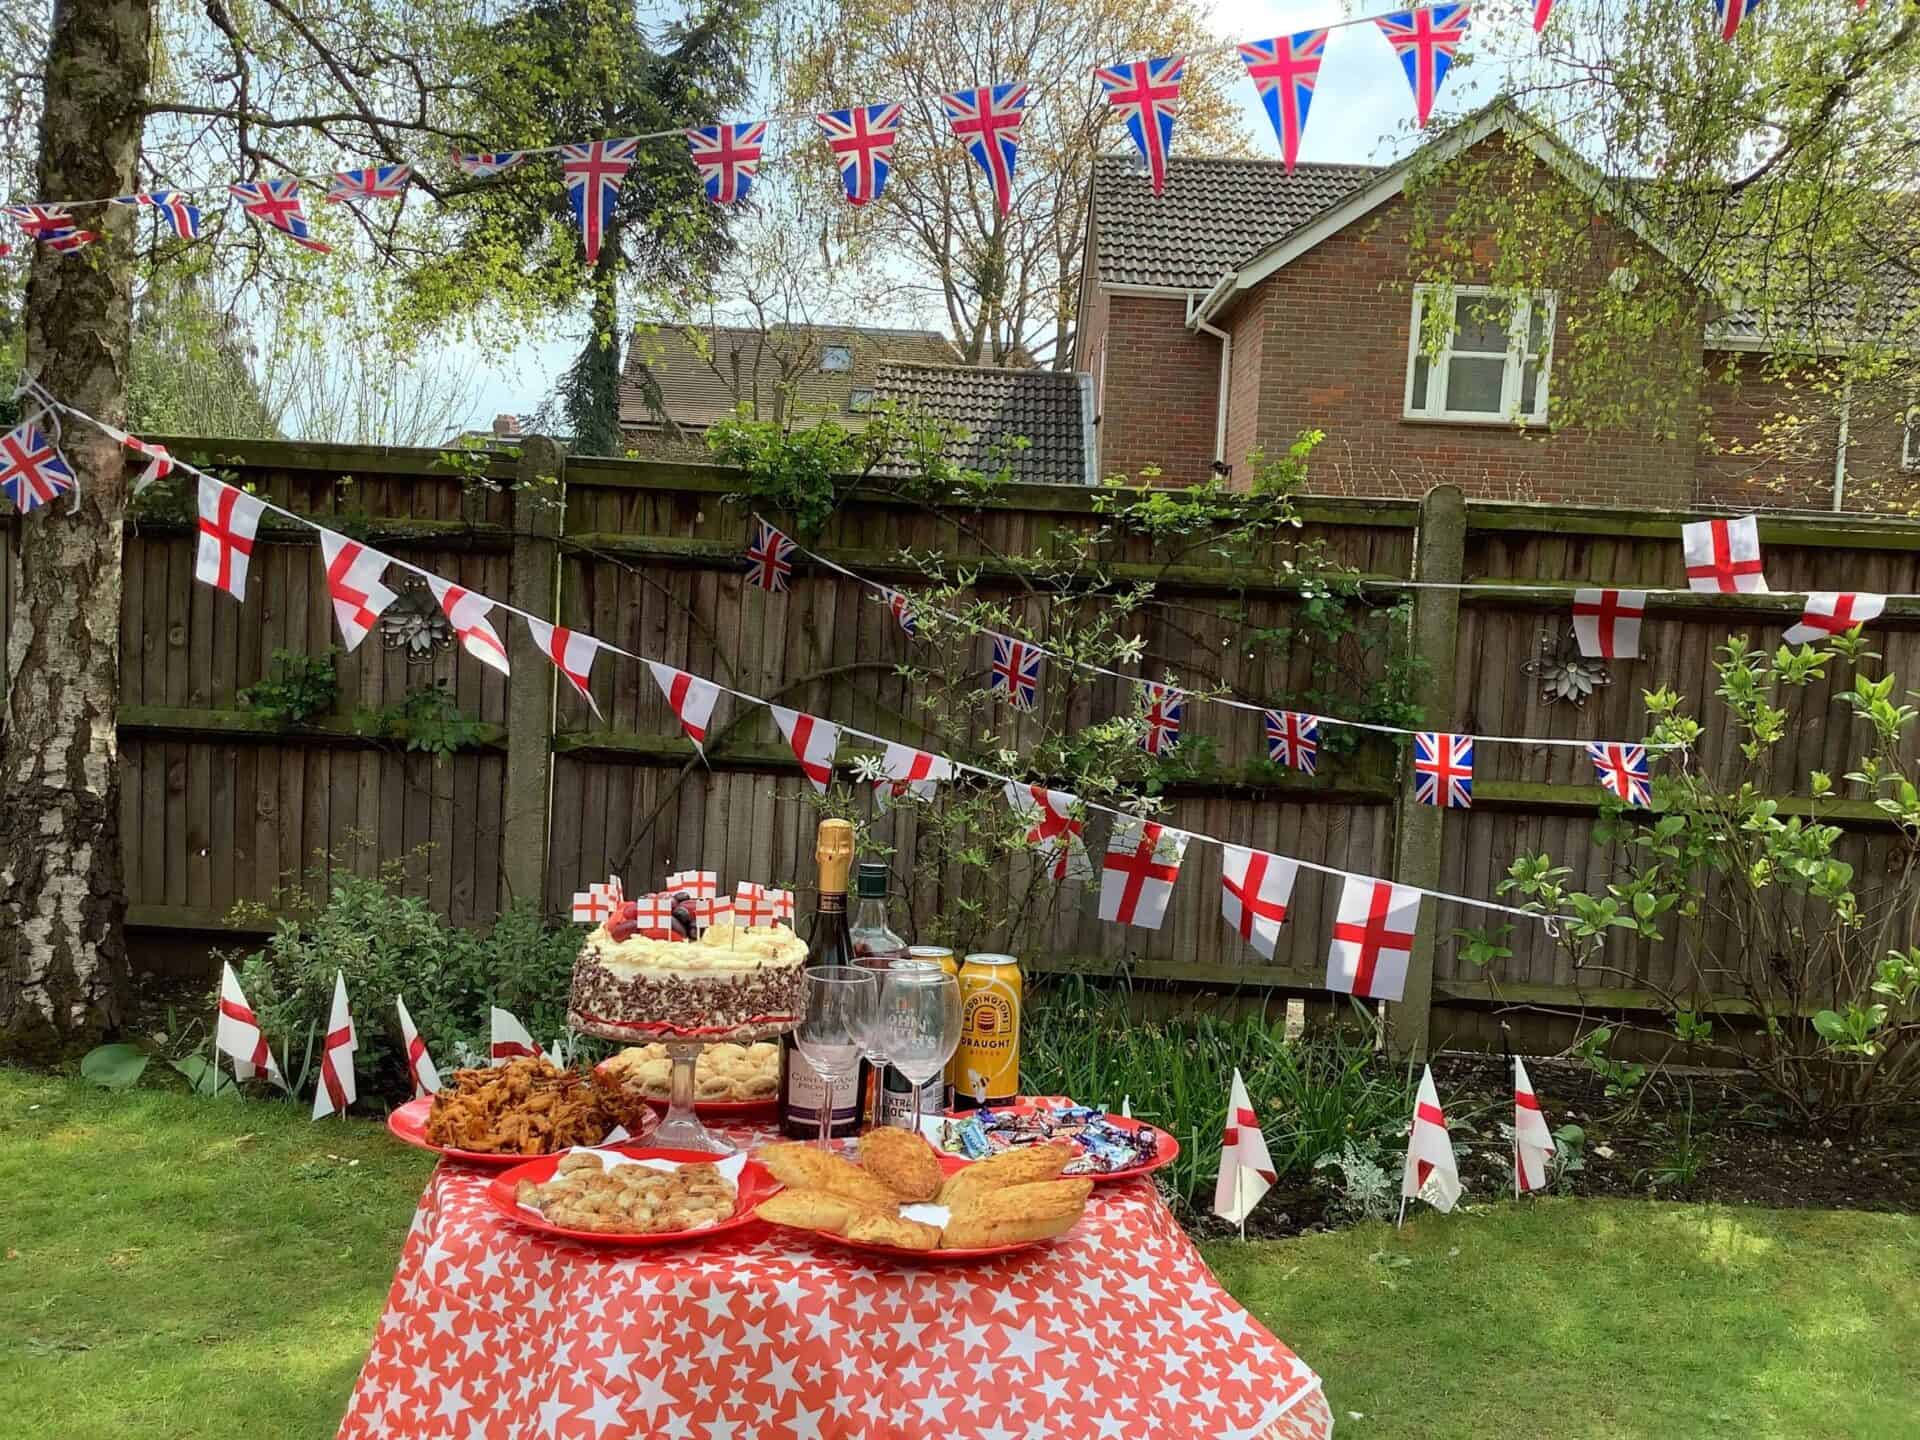 A festive garden party table laden with food under strings of British flags at Oxford House, celebrating a patriotic event outdoors.